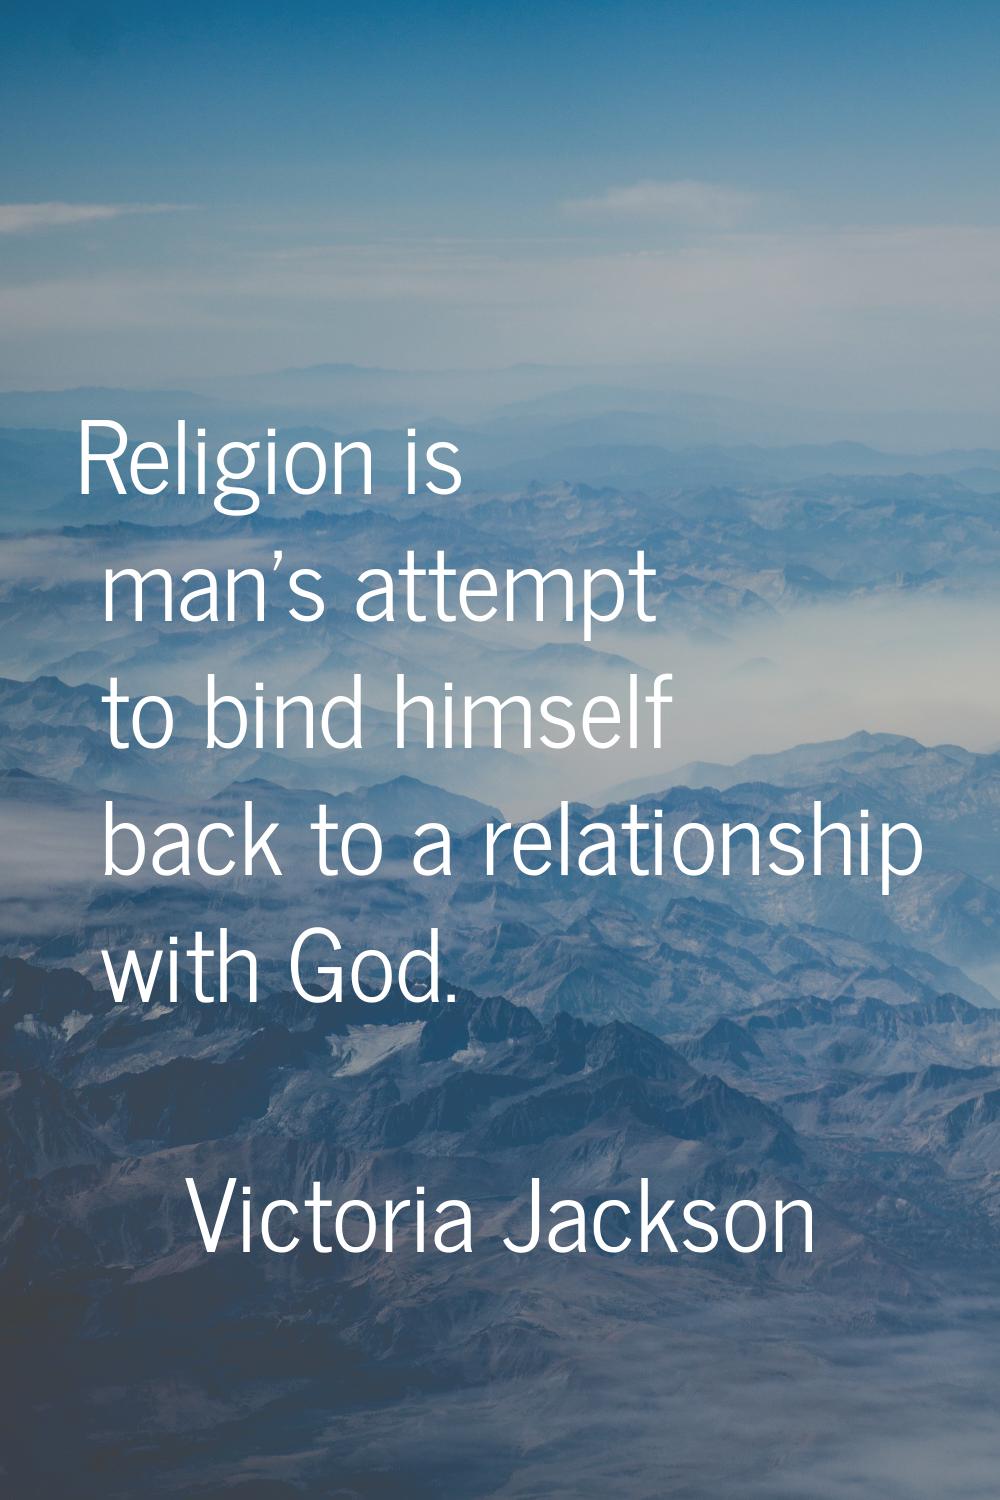 Religion is man's attempt to bind himself back to a relationship with God.